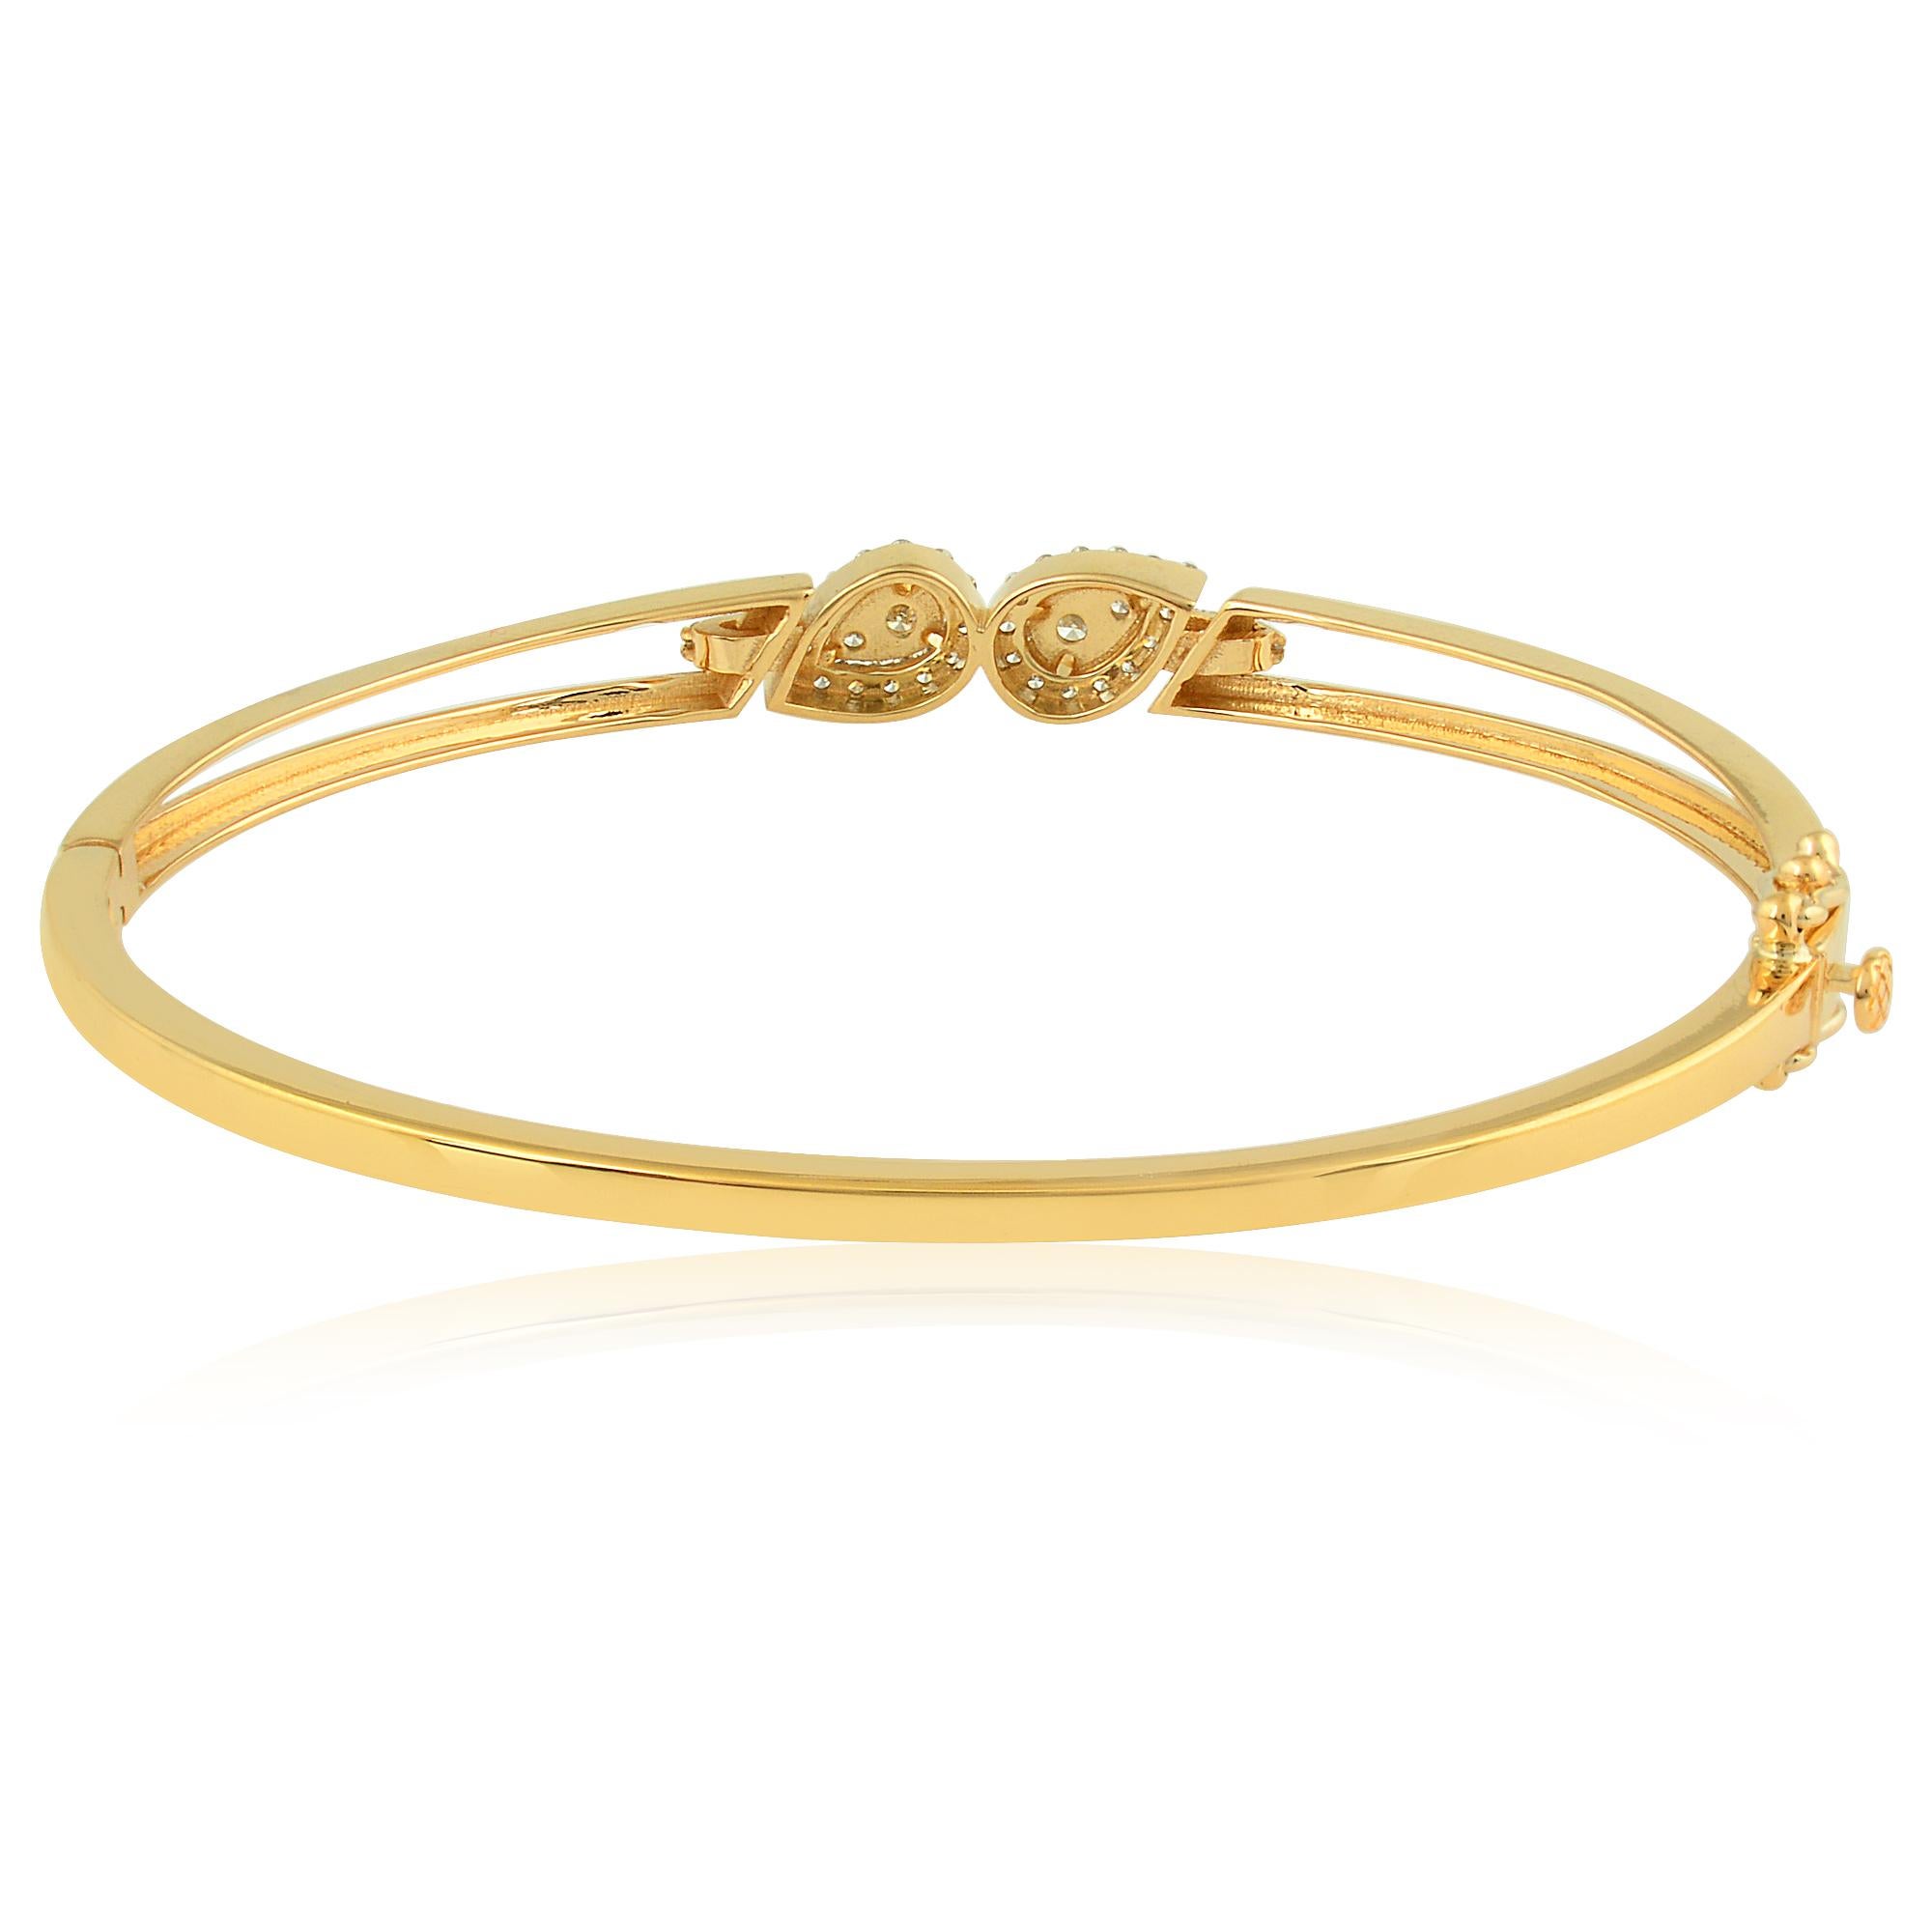 The warm glow of the yellow gold provides the perfect backdrop for the shimmering diamonds, enhancing their natural beauty and adding a touch of timeless elegance to the design. The smooth and polished surface of the bangle ensures a comfortable